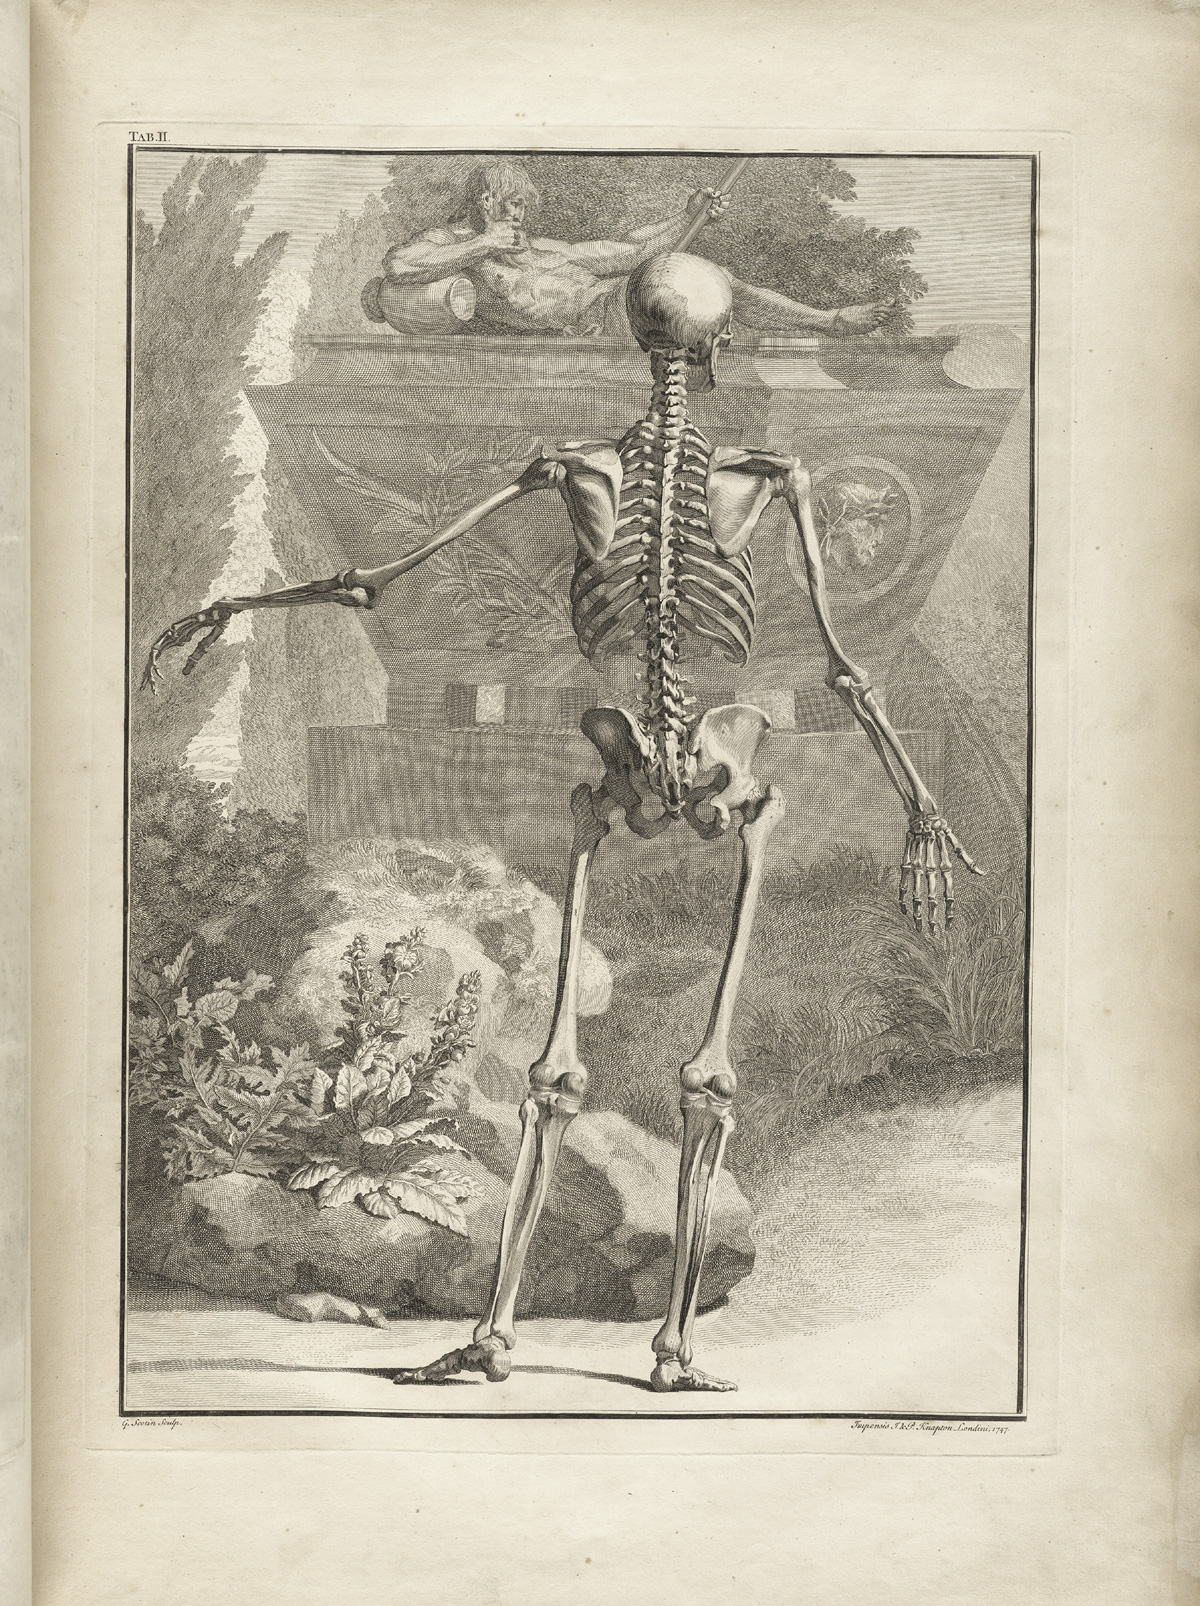 Table 2 of Bernhard Siegfried Albinus' Tabulae sceleti et musculorum corporis humani, featuring a full length posterior view of a skeleton in a landscape with its left arm is extended.